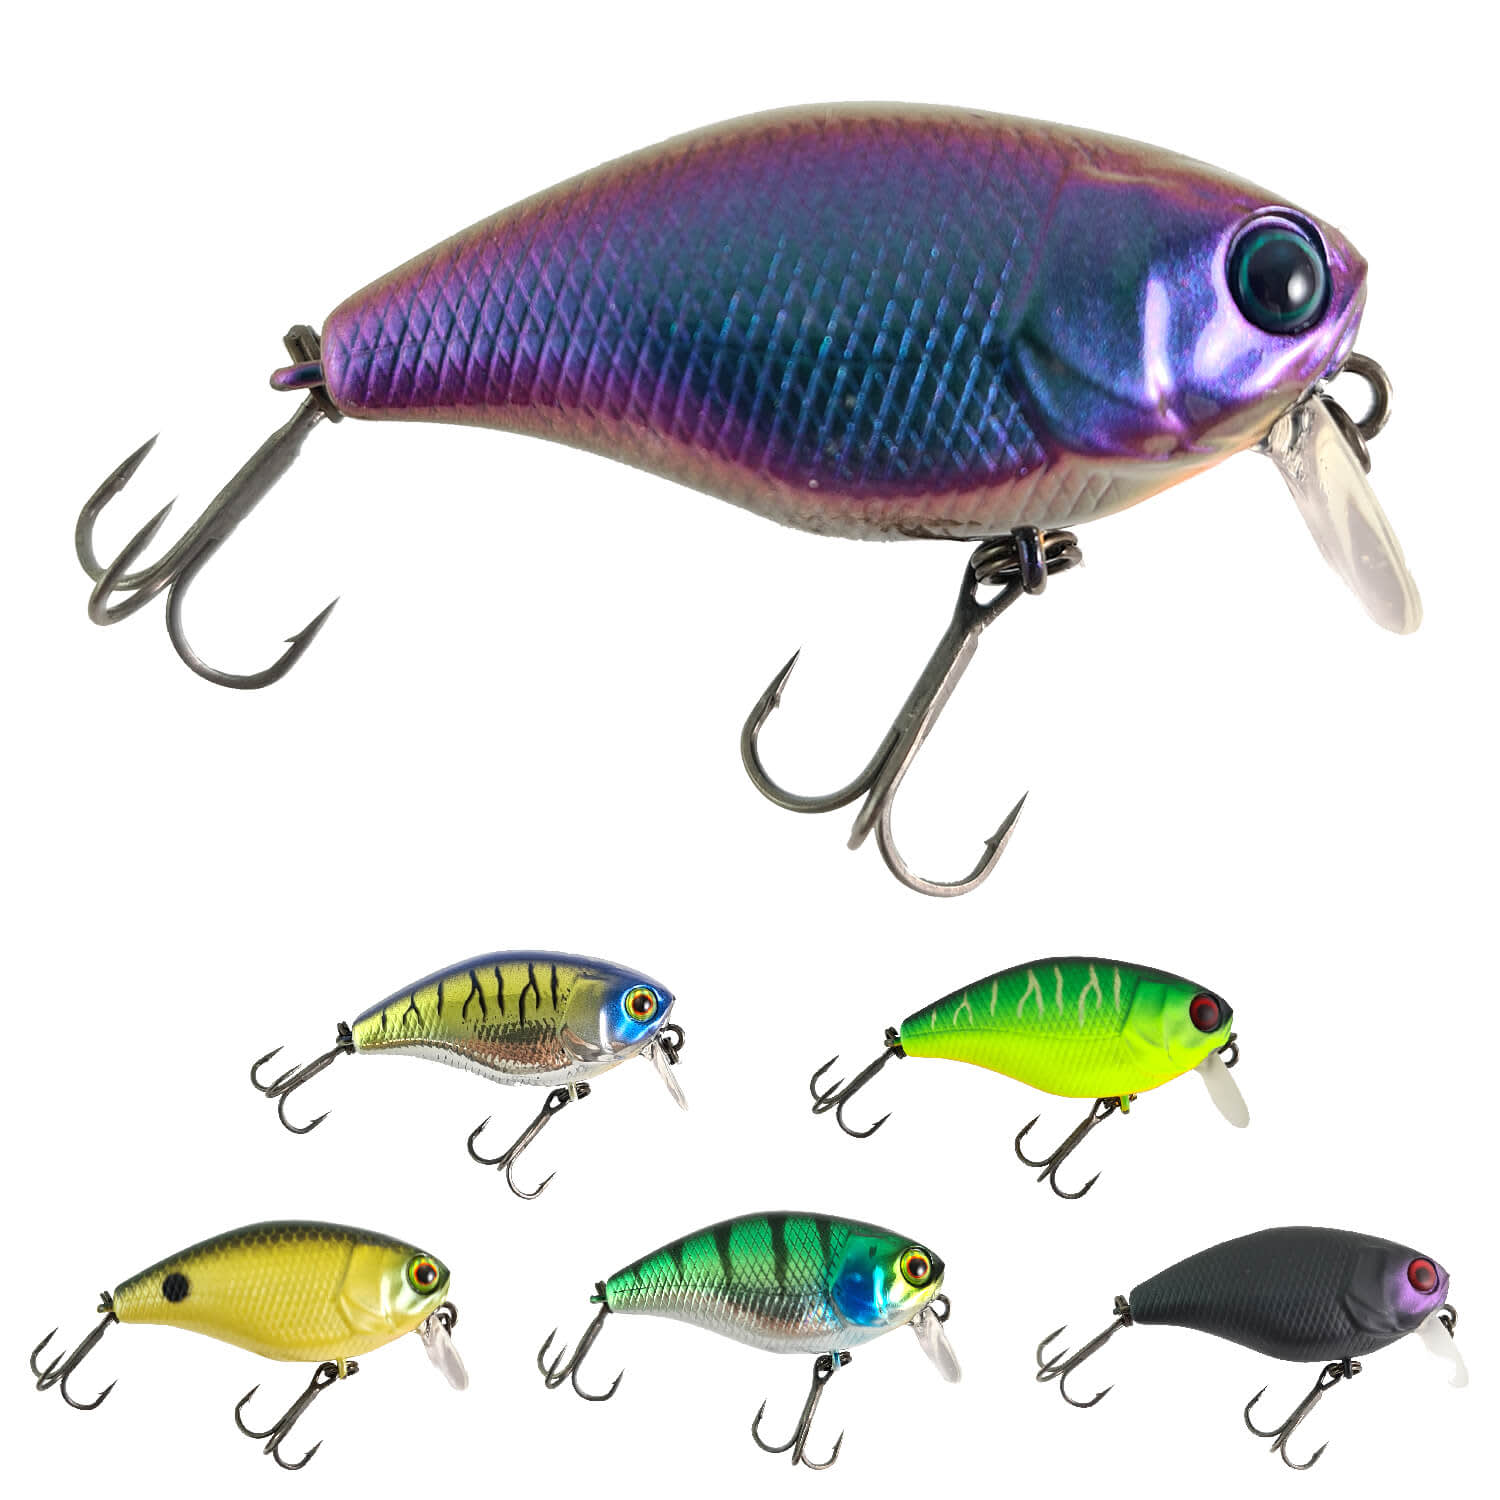 Illex Lure Cherry One Footter Limited Edition buy by Koeder Laden